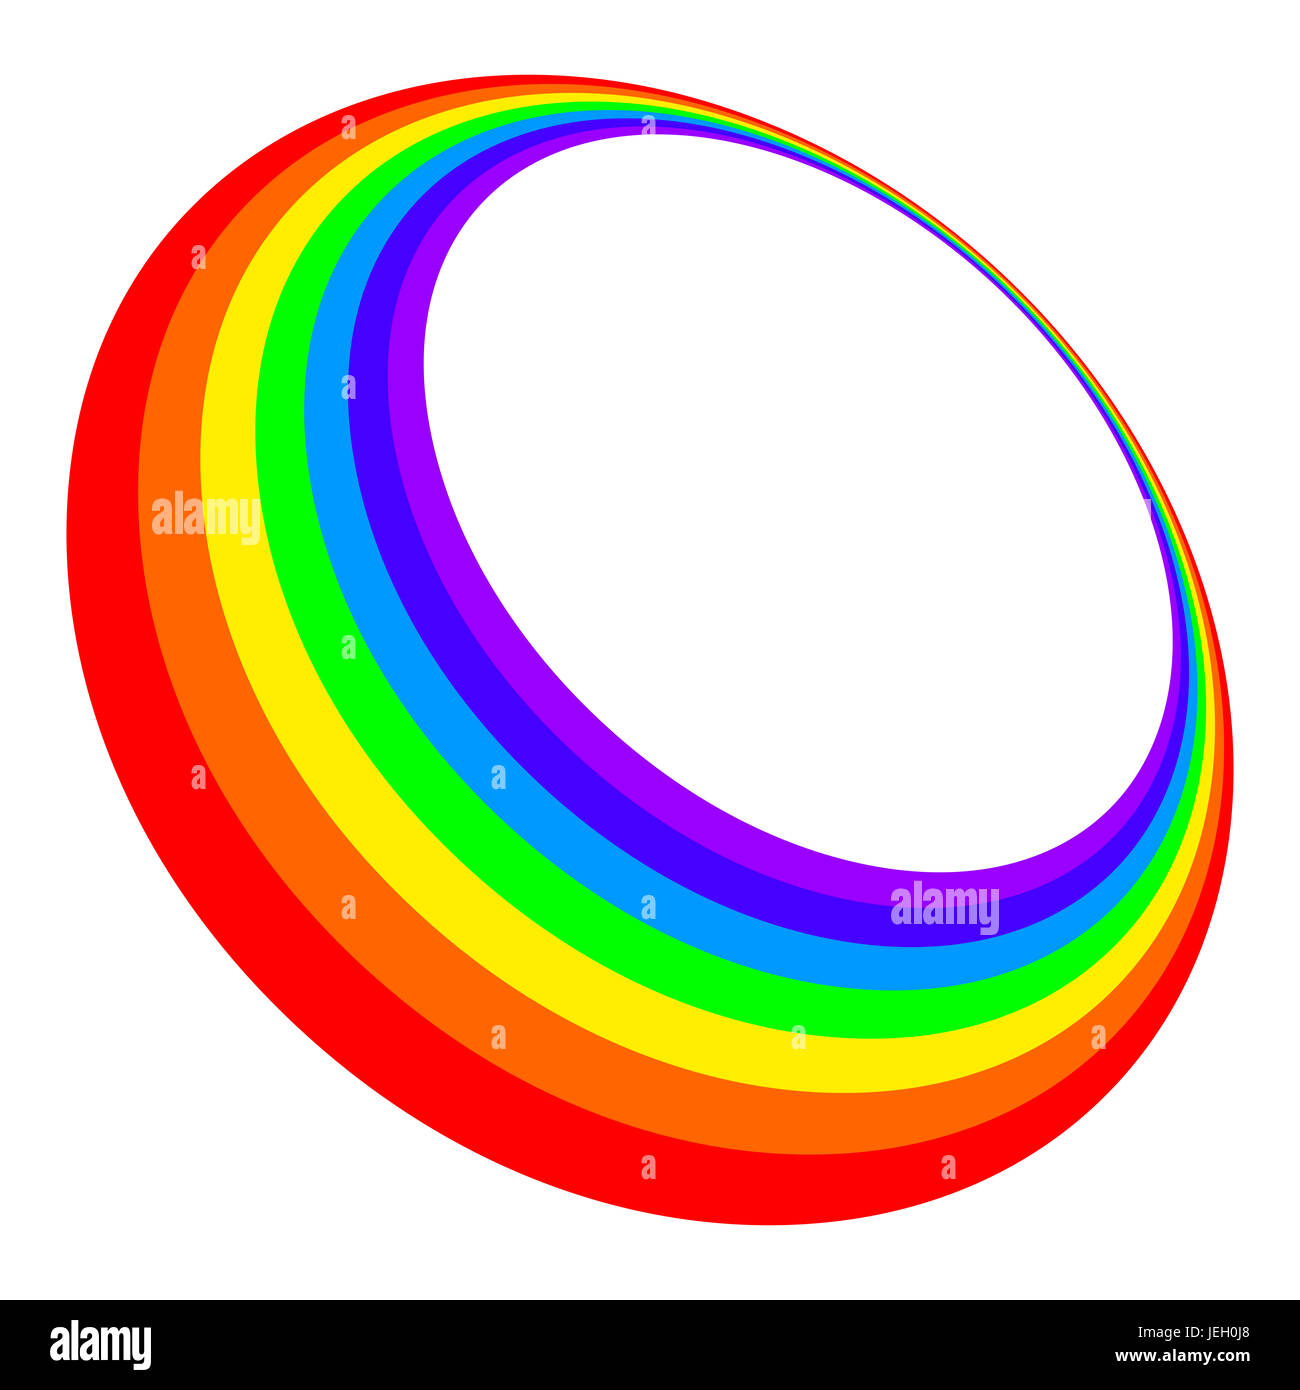 Three dimensional rainbow circle in the seven colors of visible light spectrum red, orange, yellow, green, blue, indigo and violet. Stock Photo